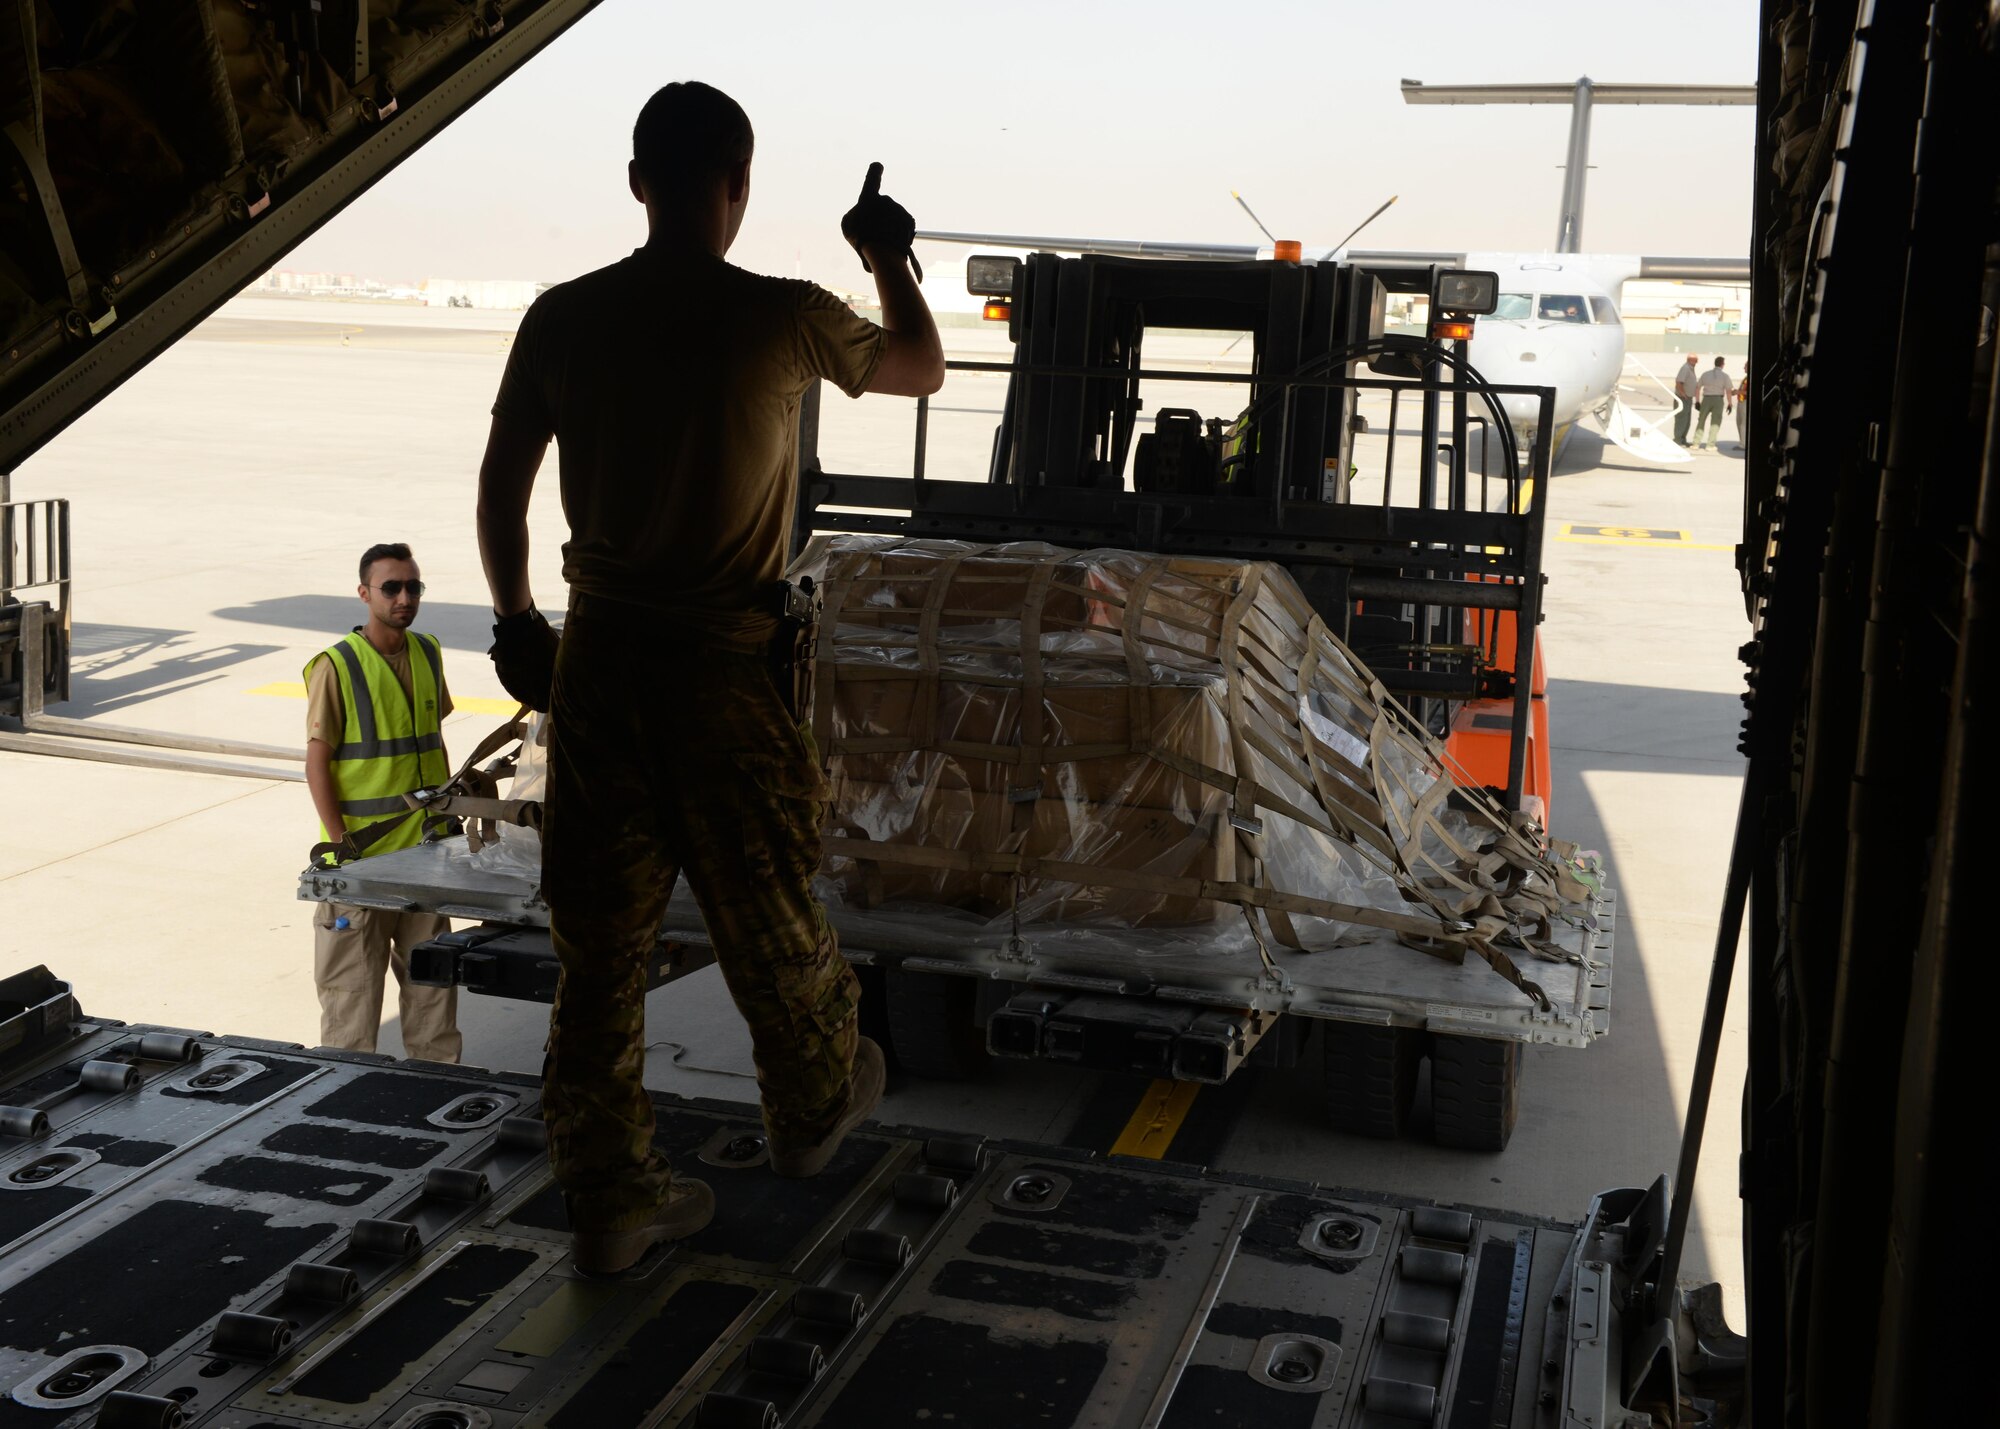 U.S. Air Force Staff Sgt. Casey Strauss, 774th Expeditionary Airlift Squadron C-130J Super Hercules aircraft loadmaster, gives directions to a cargo loader during a shipment pick-up Aug. 28, 2015, at Hamid Karzai International Airport in Kabul, Afghanistan. Strauss and his fellow loadmasters are responsible for loading and unloading cargo, passenger safety in flight, and ensuring the aircraft stays within the proper weight and balance limitations. (U.S. Air Force photo by Senior Airman Cierra Presentado/Released)